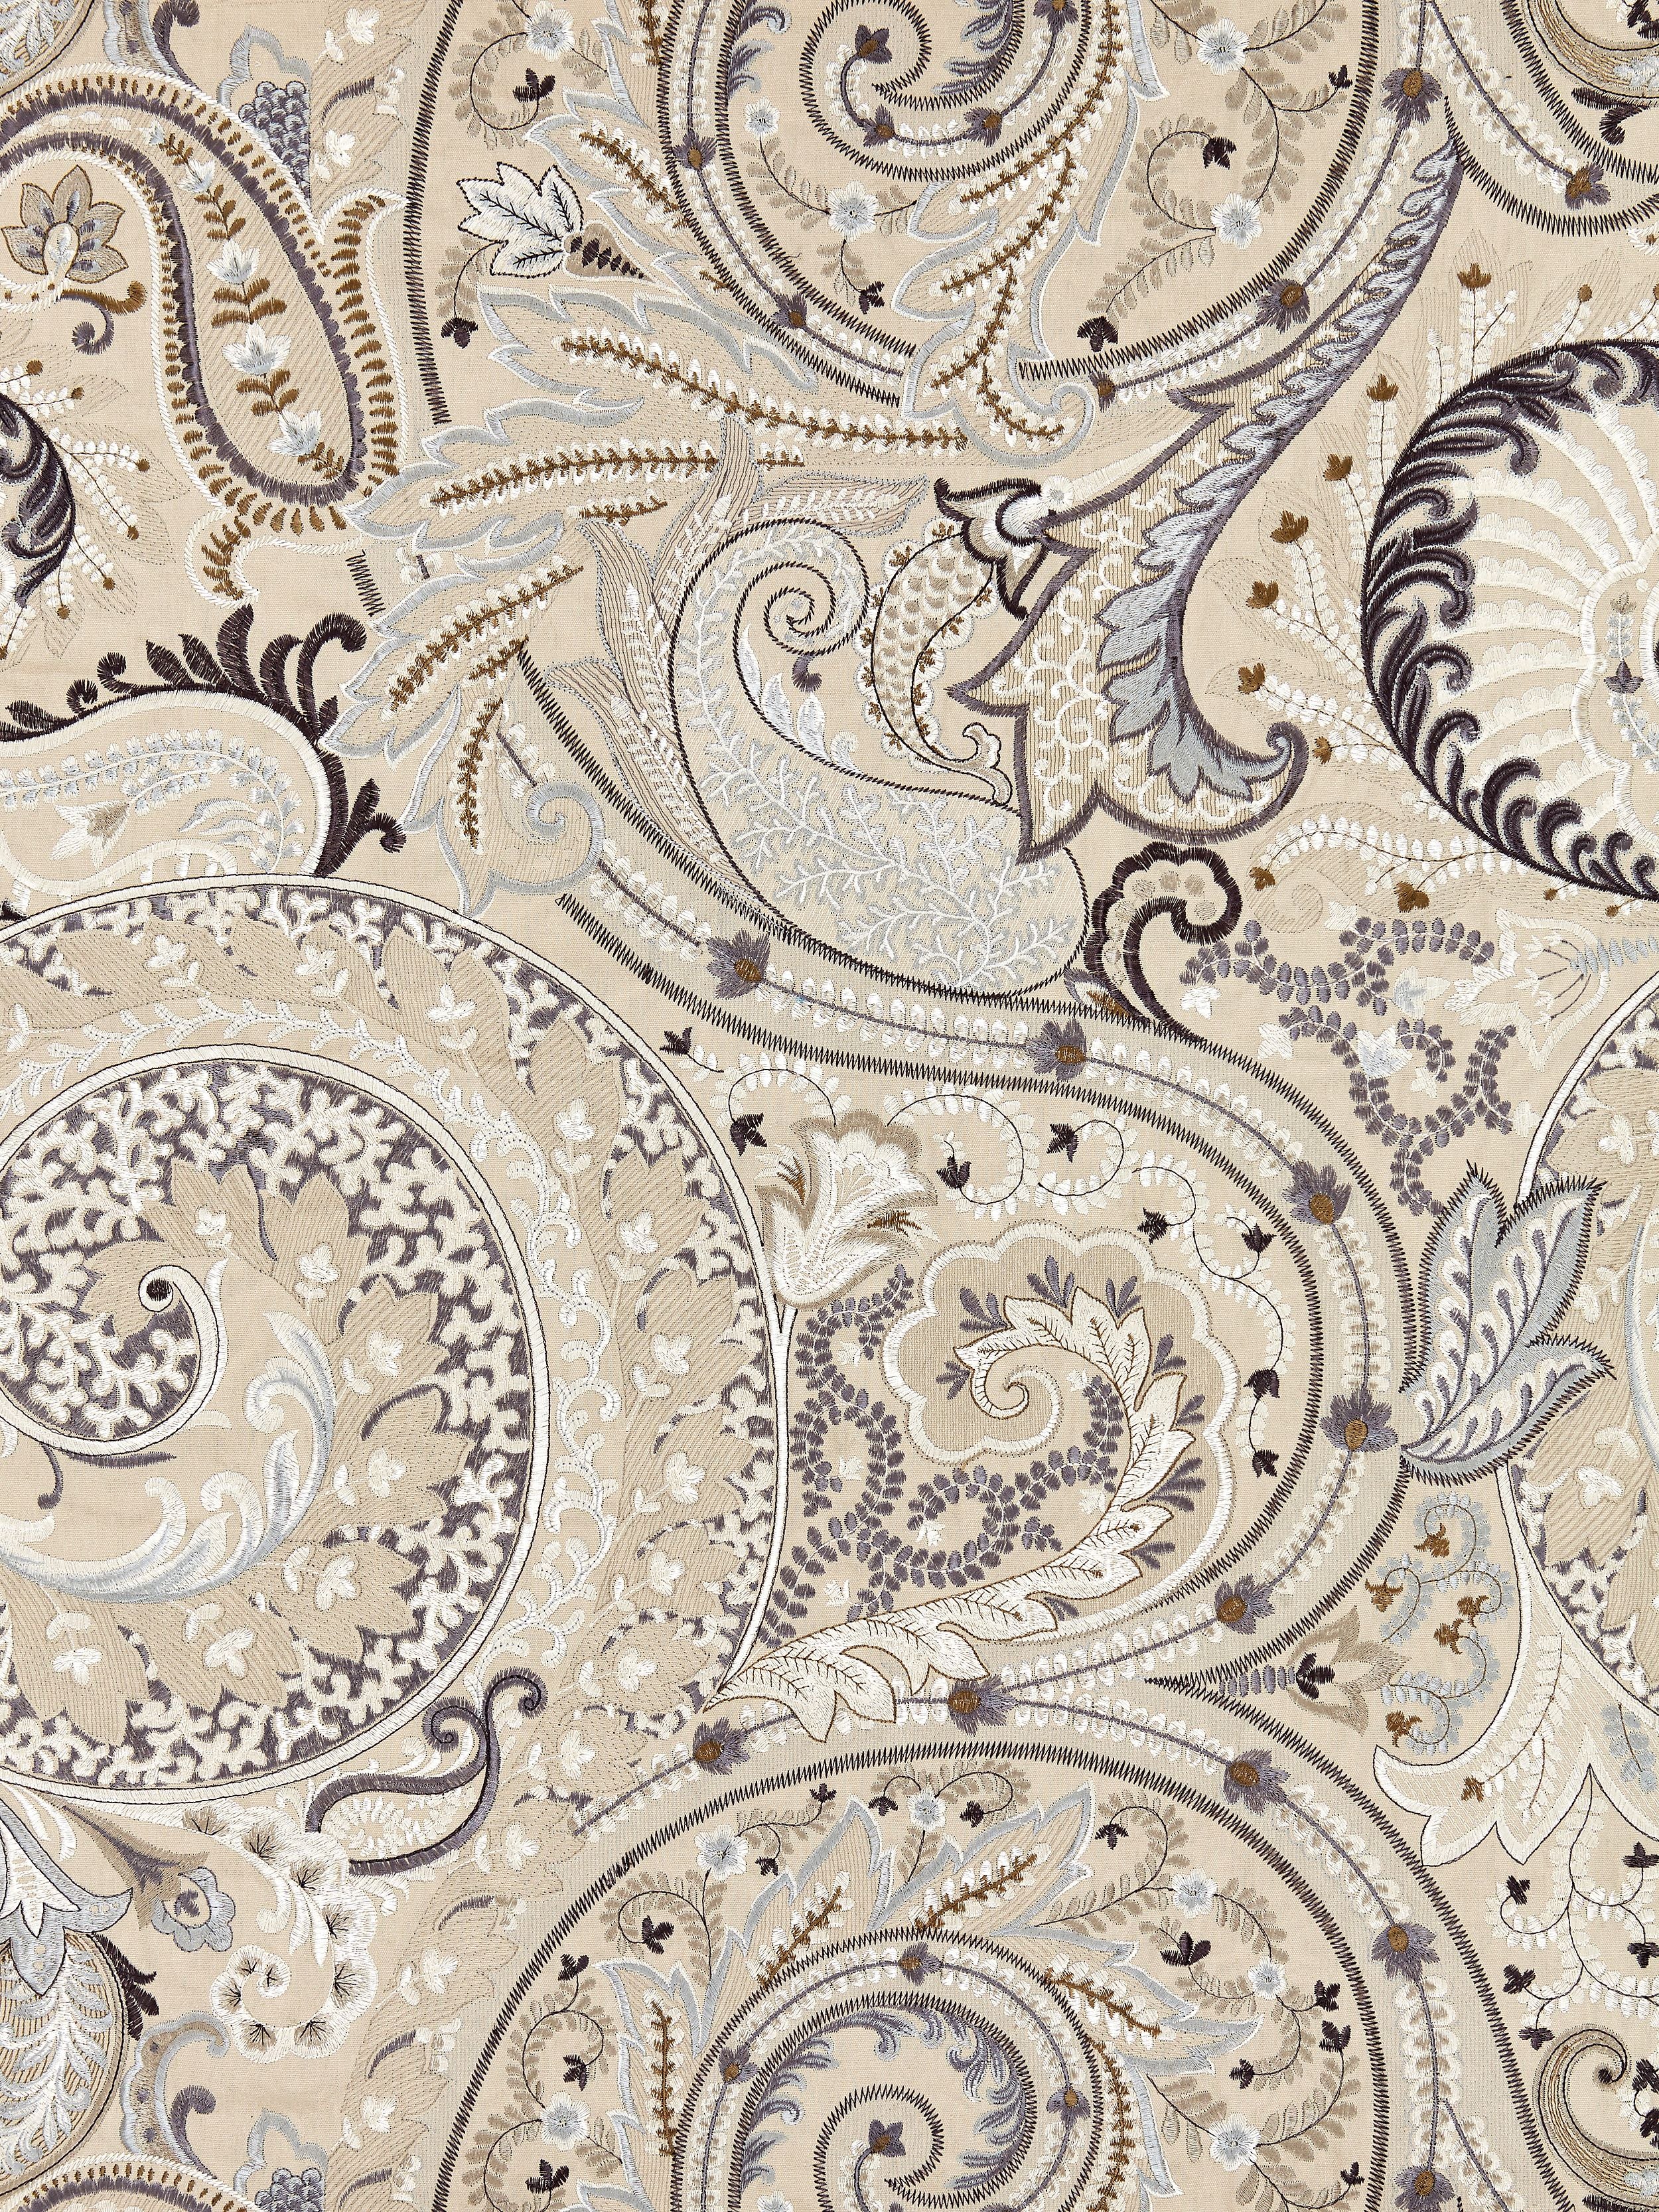 Malabar Paisley Embroidery fabric in flax color - pattern number SC 000327124 - by Scalamandre in the Scalamandre Fabrics Book 1 collection